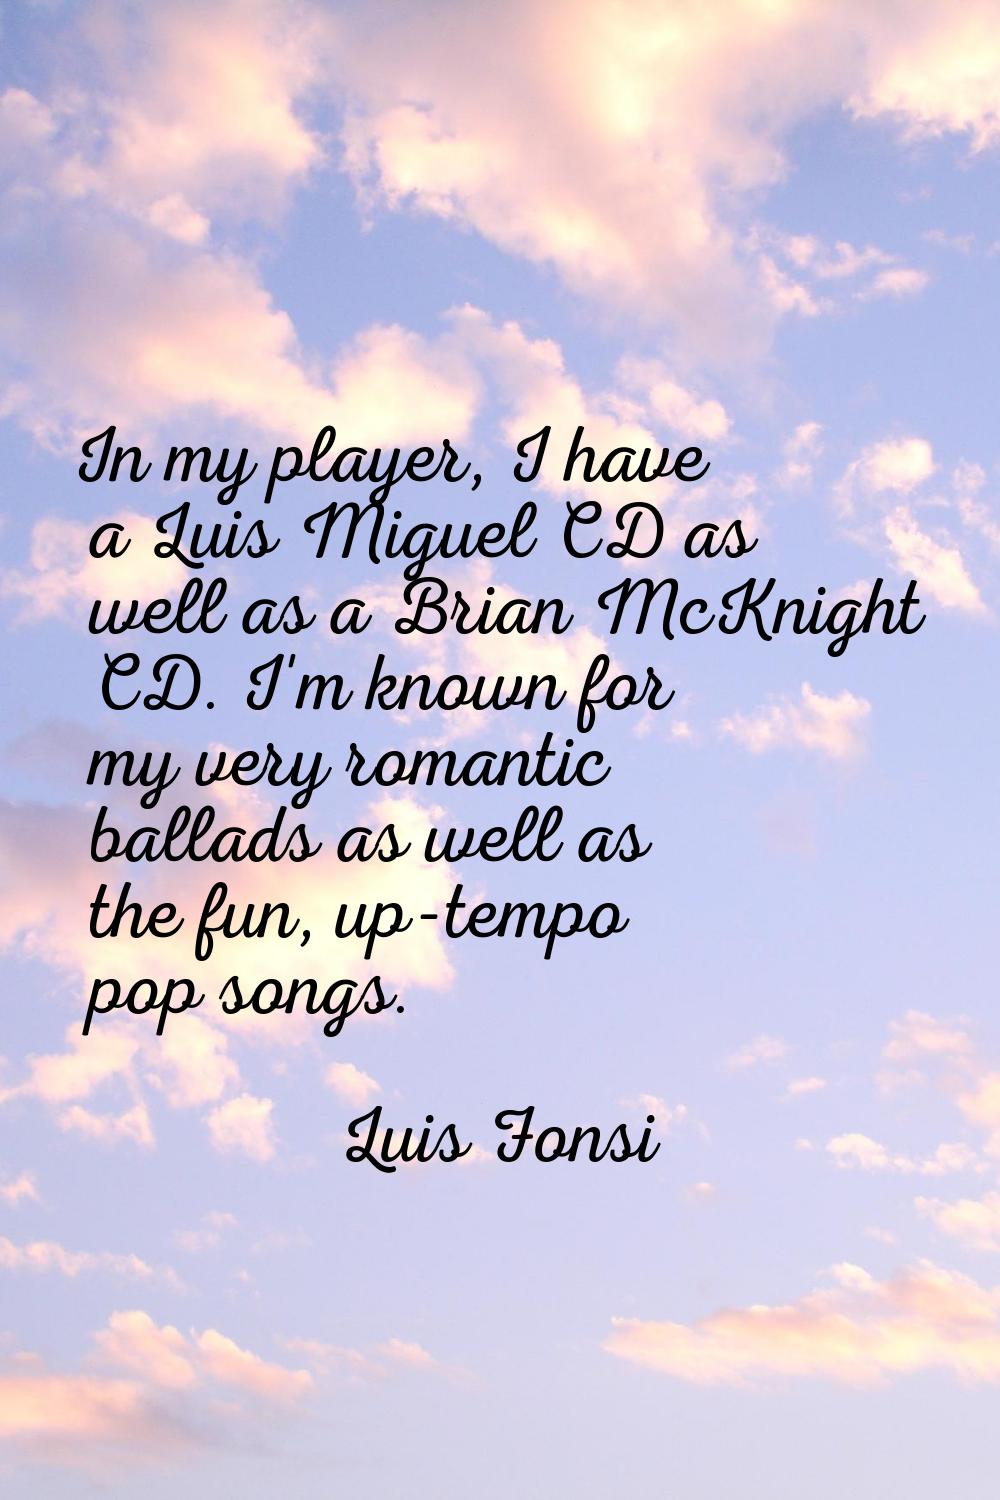 In my player, I have a Luis Miguel CD as well as a Brian McKnight CD. I'm known for my very romanti